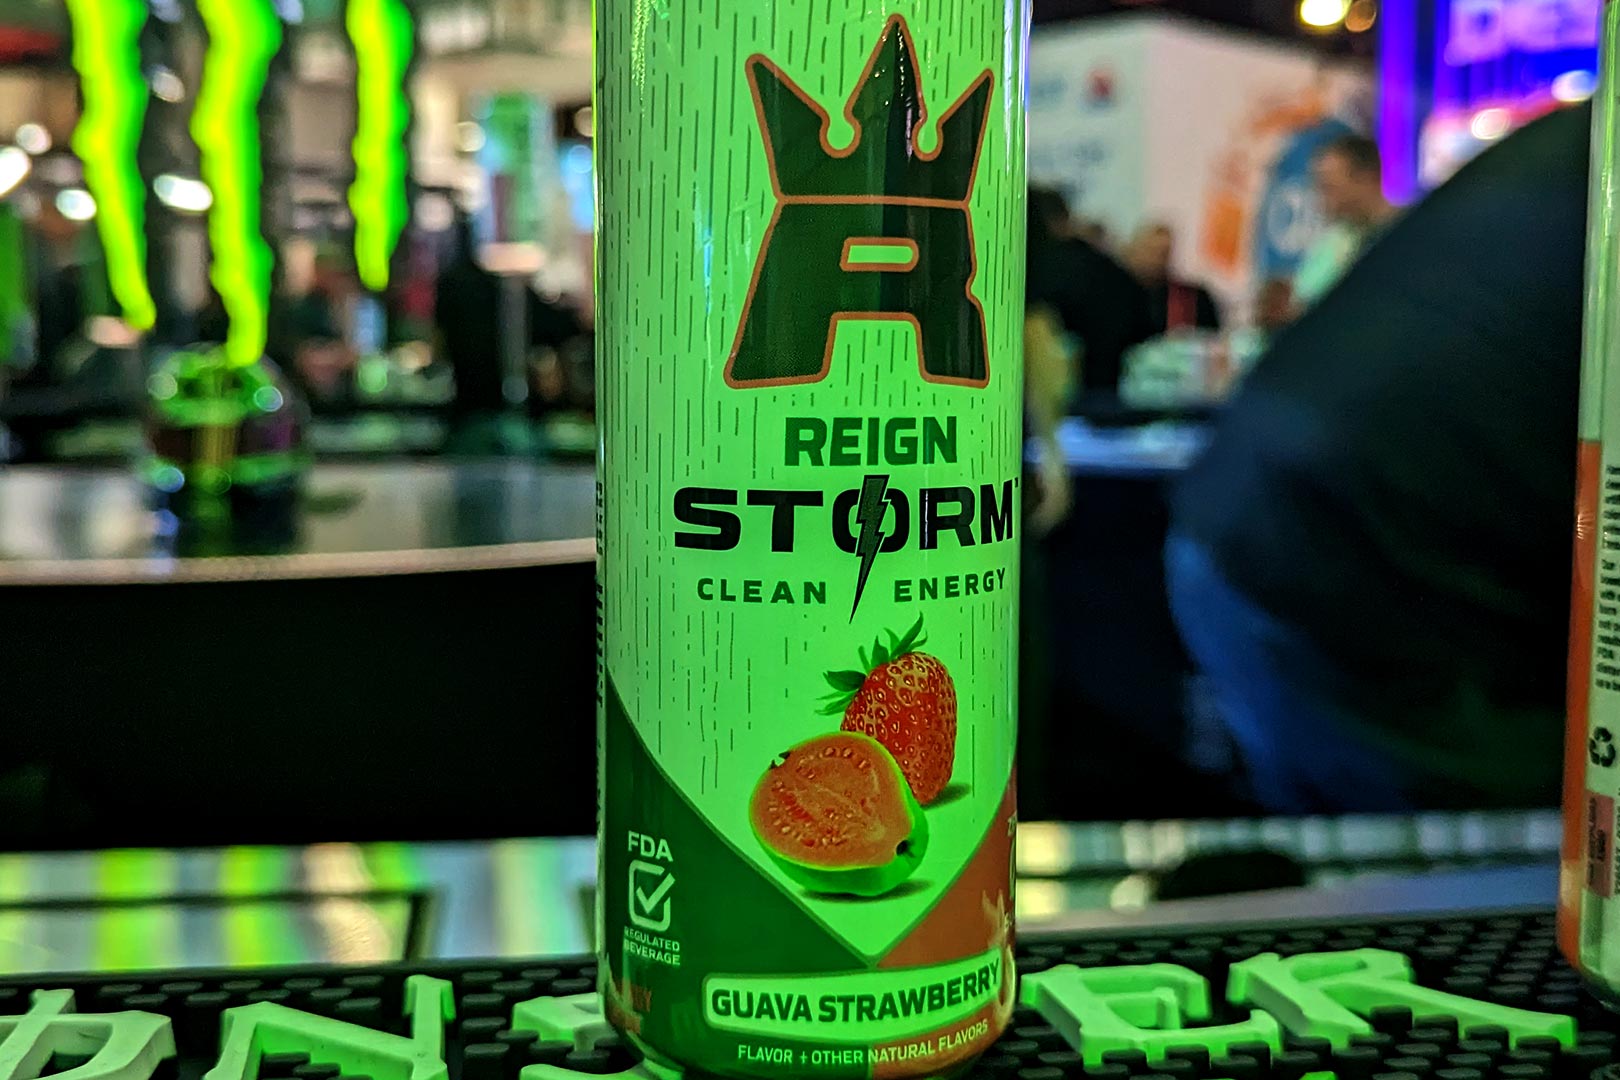 Guava Strawberry Reign Storm Clean Energy Drink